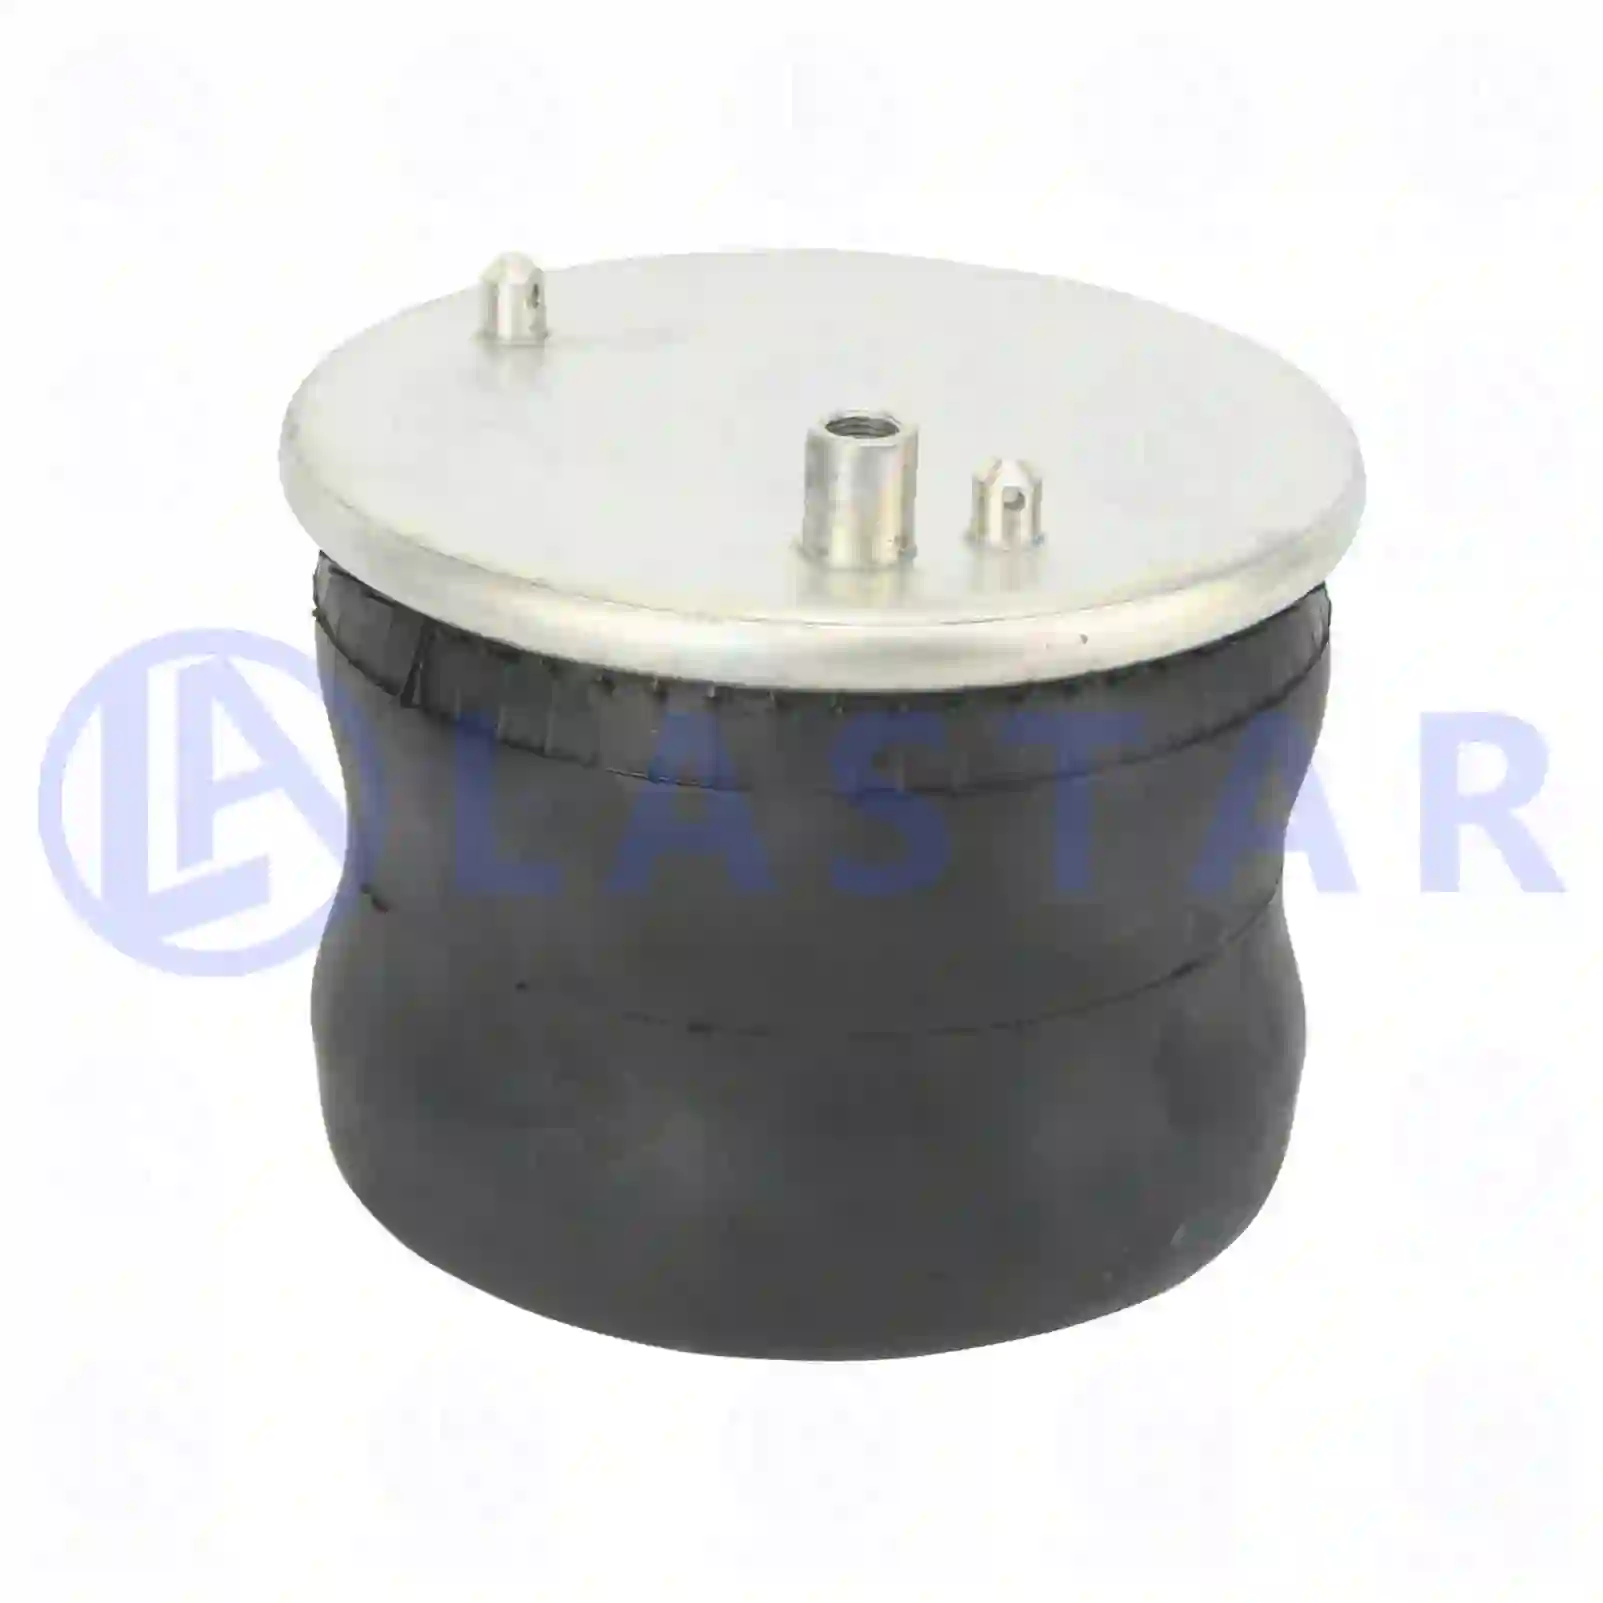 Air spring, with steel piston, 77727195, 20573108, 20573109, 70313718, 70321692, ZG40762-0008 ||  77727195 Lastar Spare Part | Truck Spare Parts, Auotomotive Spare Parts Air spring, with steel piston, 77727195, 20573108, 20573109, 70313718, 70321692, ZG40762-0008 ||  77727195 Lastar Spare Part | Truck Spare Parts, Auotomotive Spare Parts